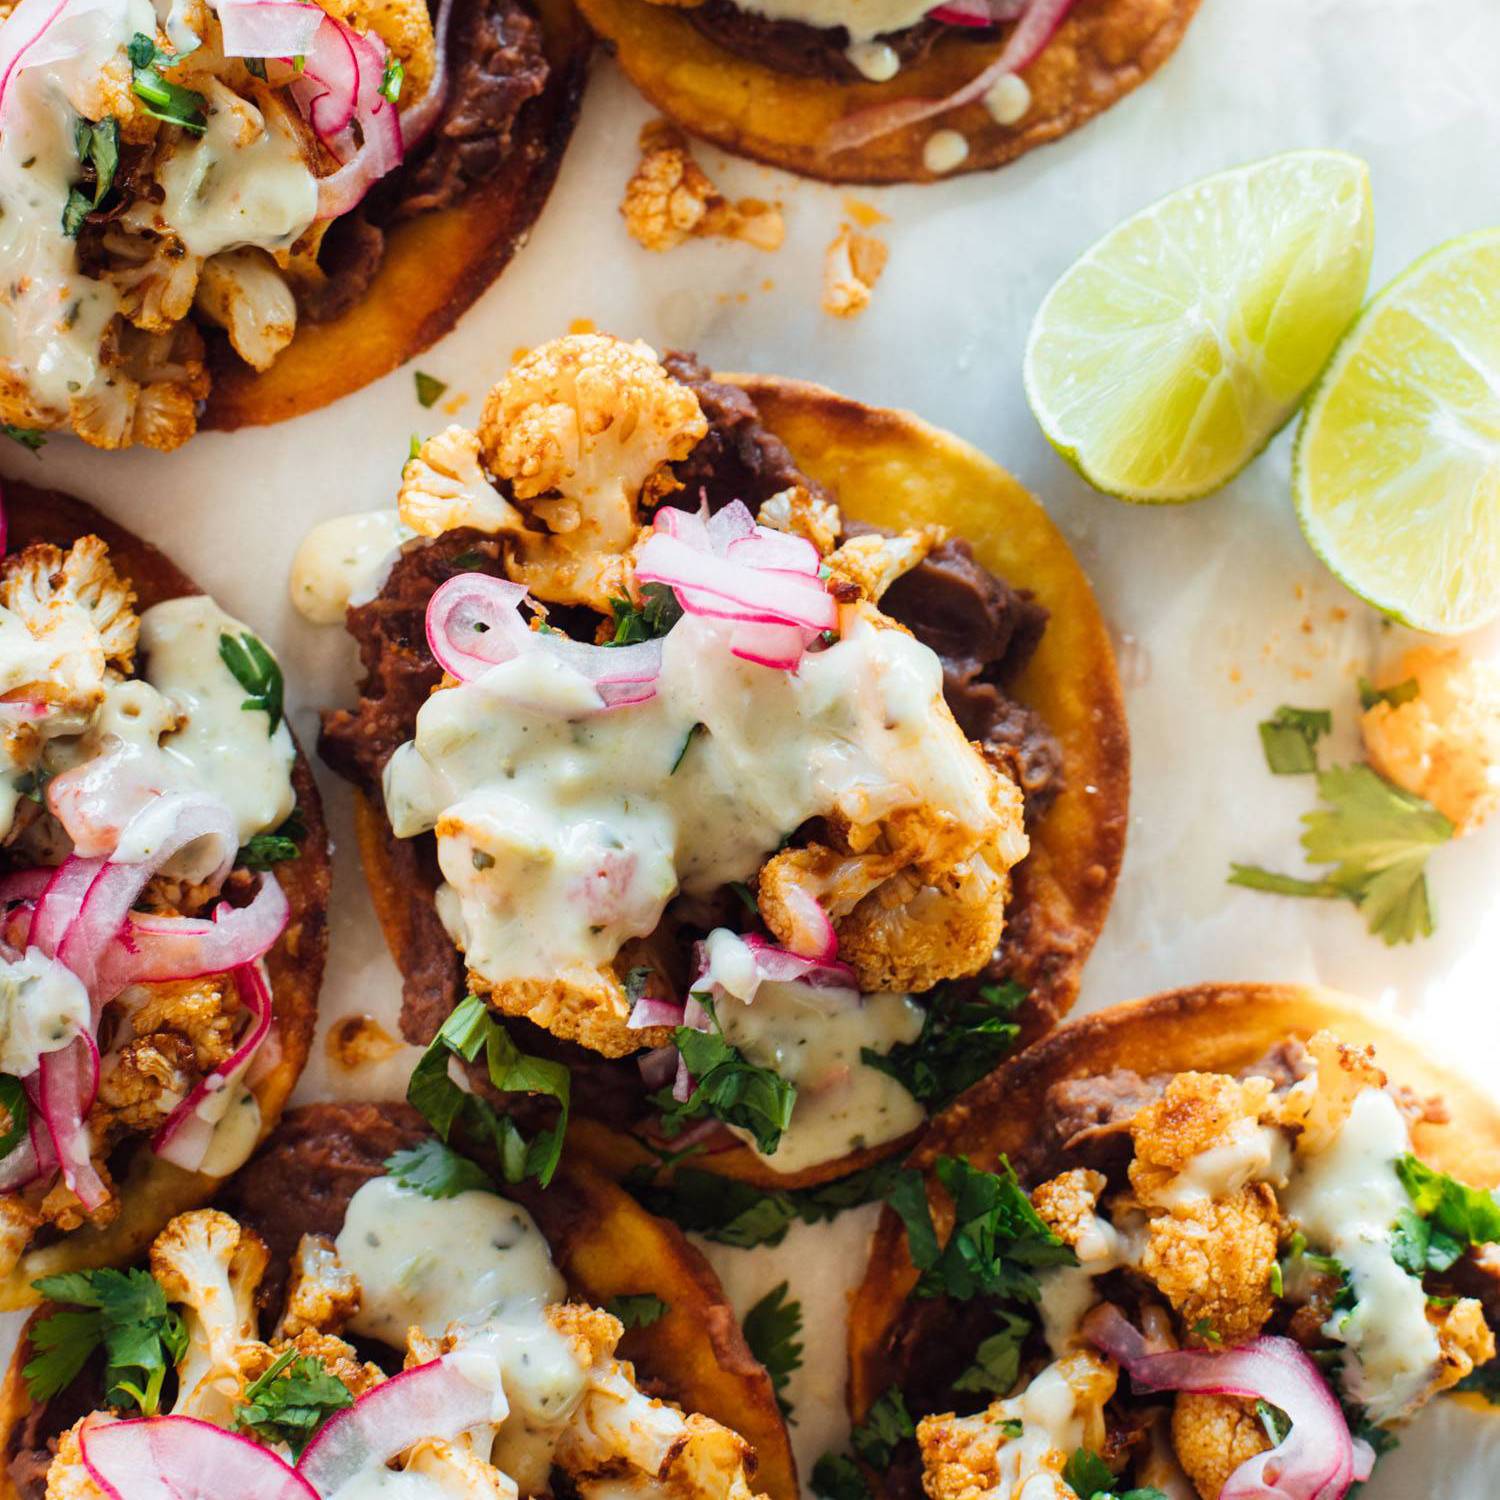 Tostadas topped with black beans, cauliflower, and queso.